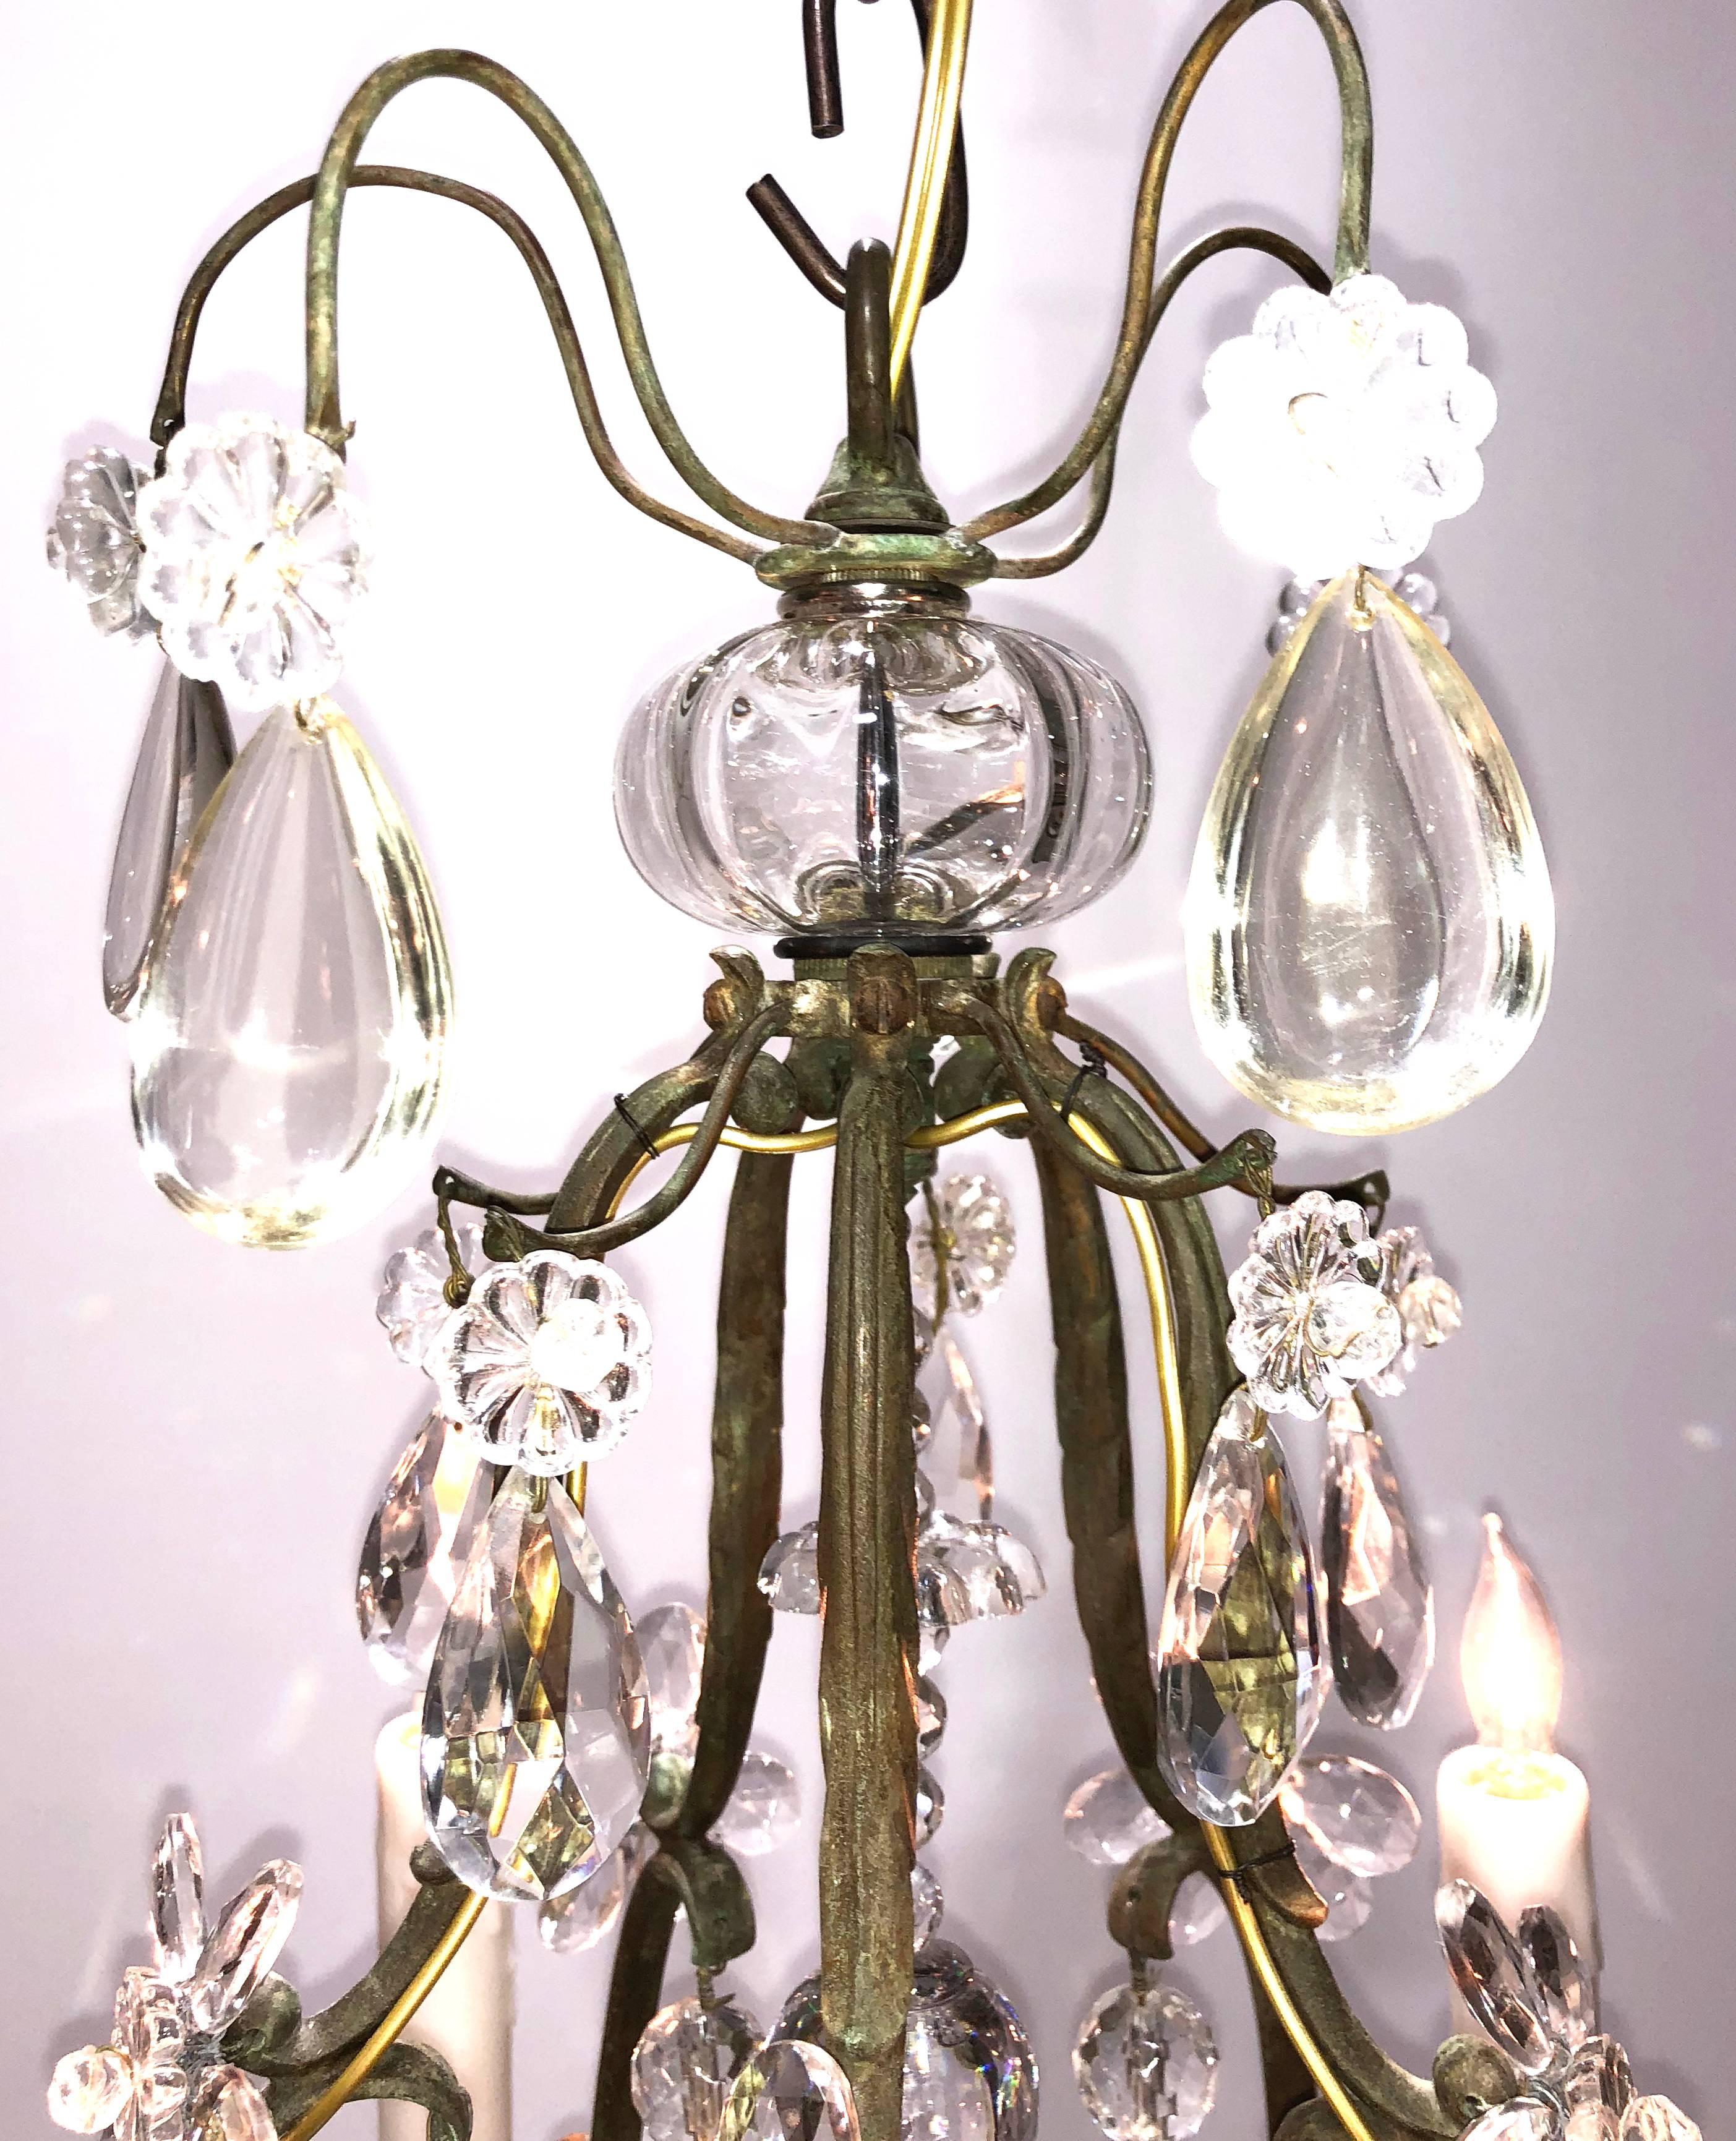 19th century French bronze and crystal birdcage chandelier, circa 1840. Originally a candle chandelier that has been electrified. Faceted crystal spires accented with smoke crystals.